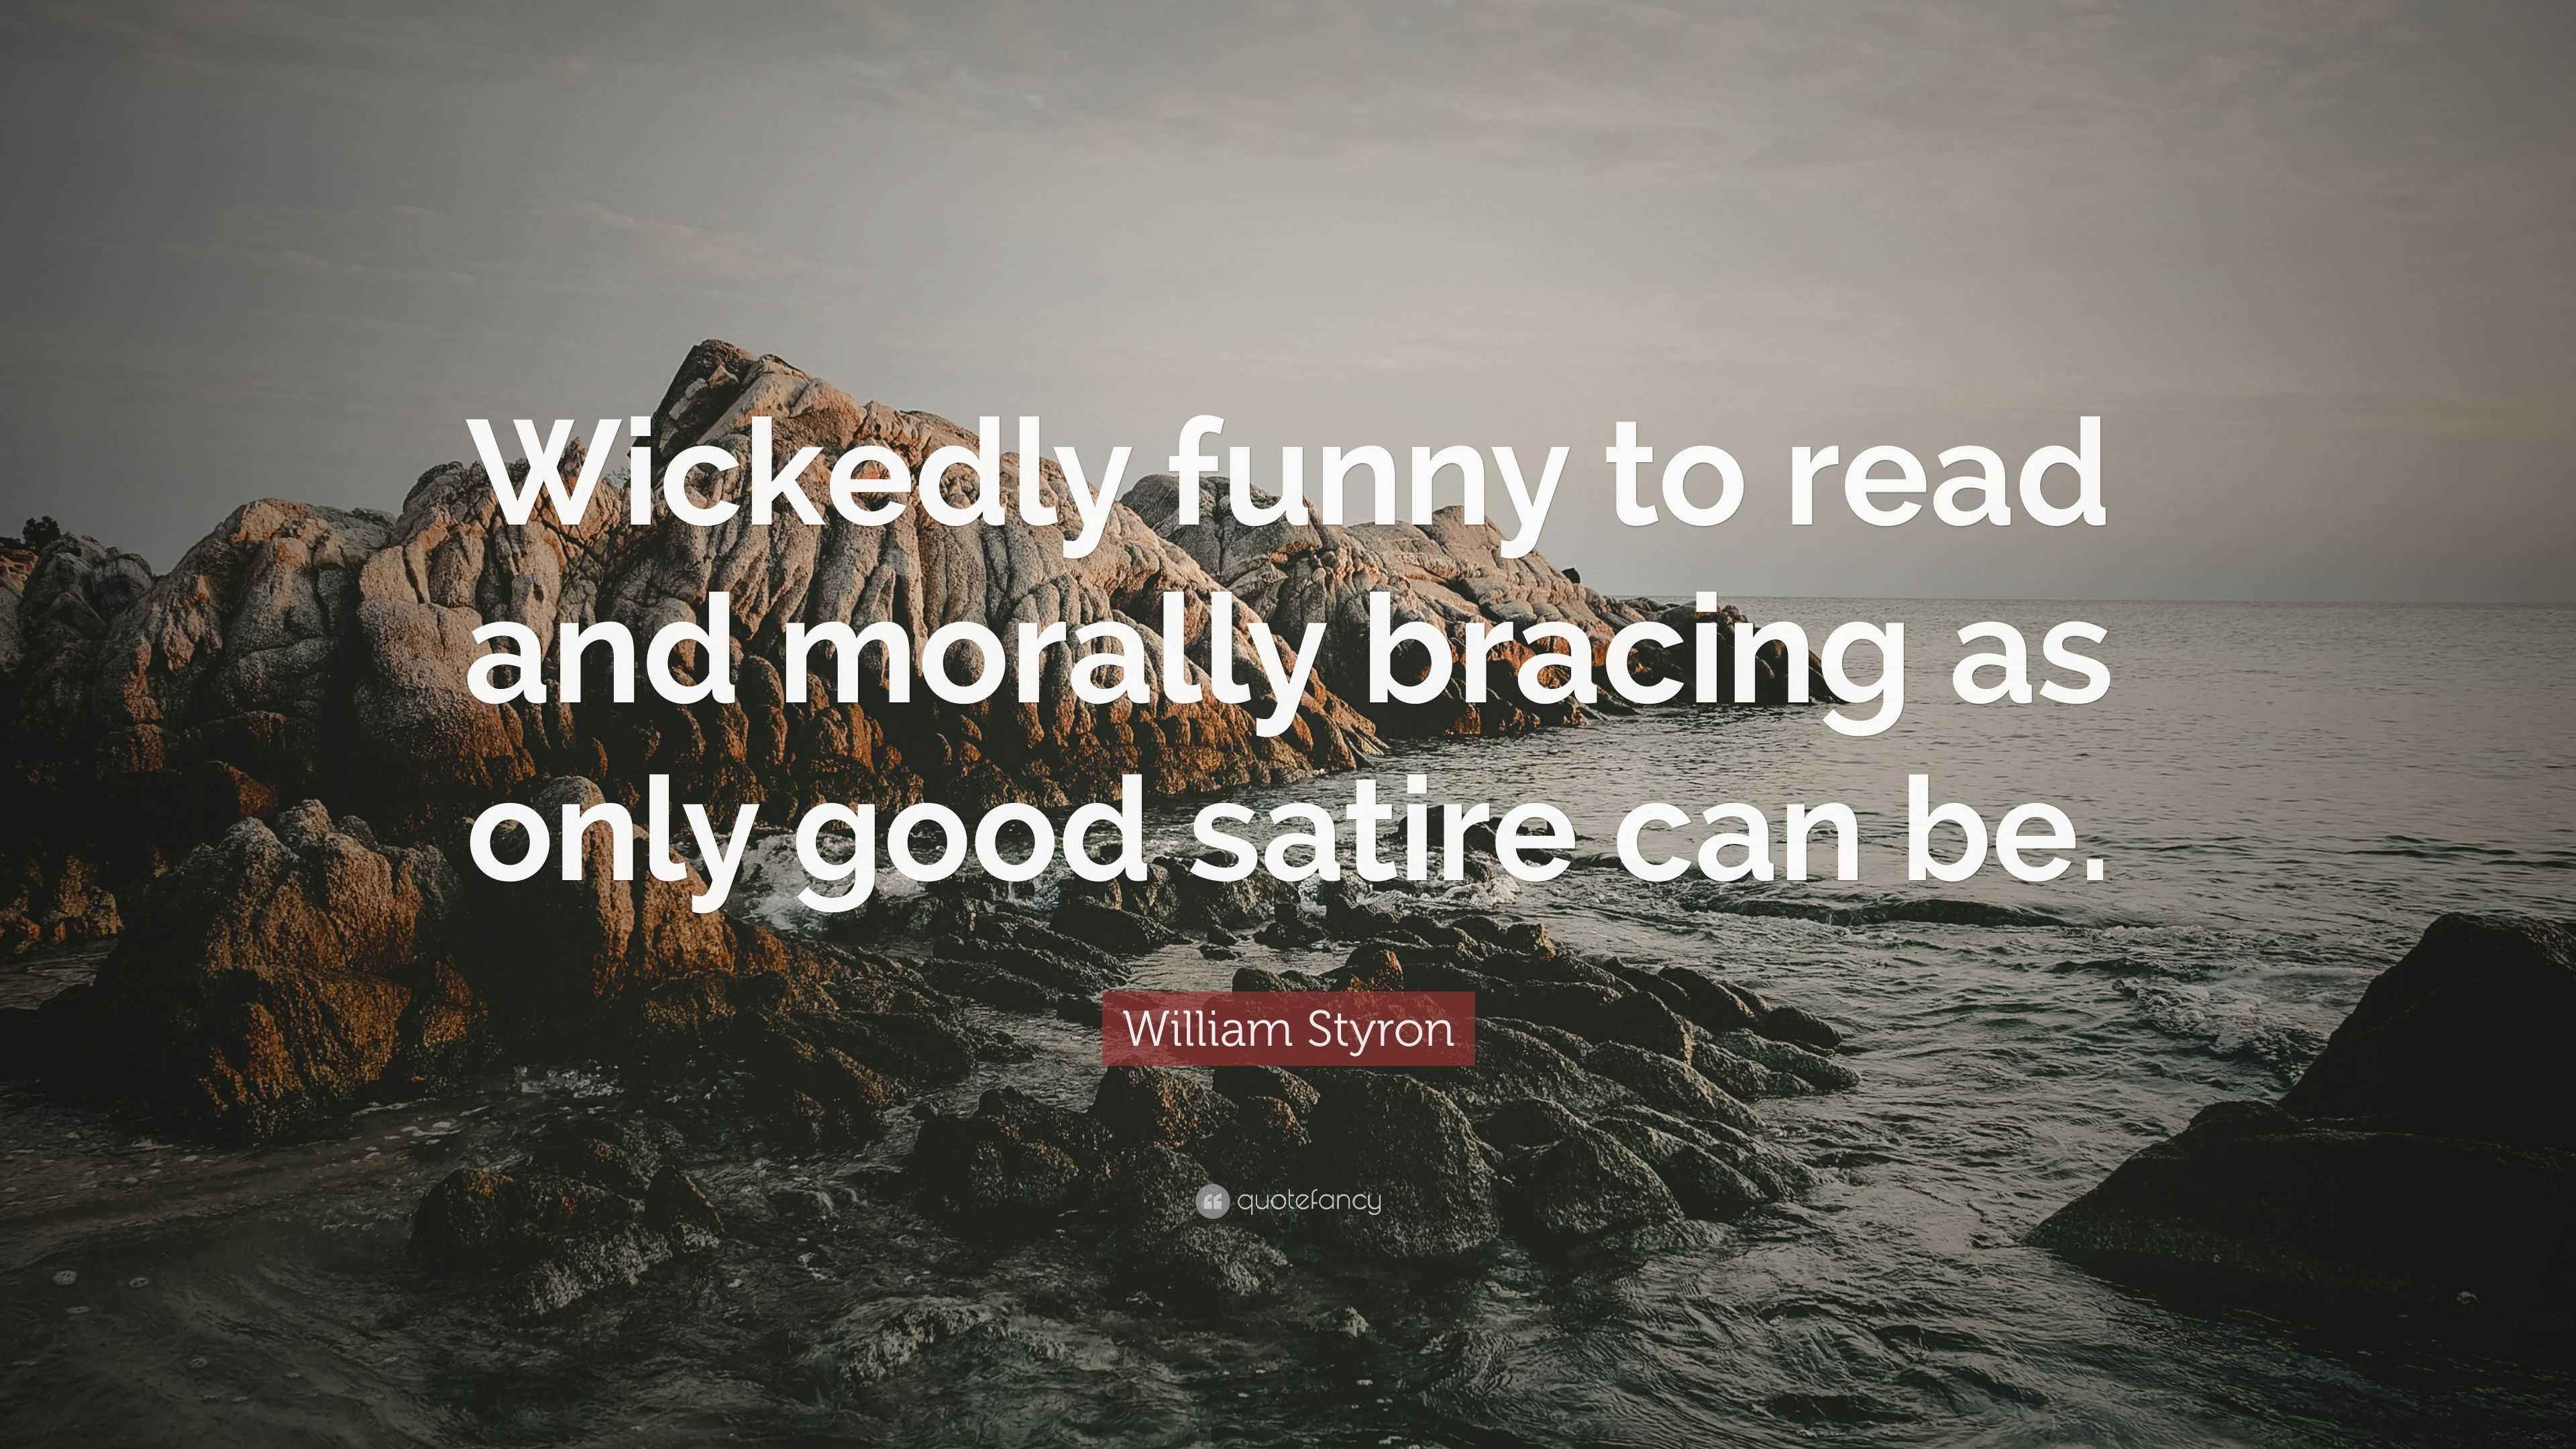 William Styron Quote: “Wickedly funny to read and morally bracing as only  good satire can be.”